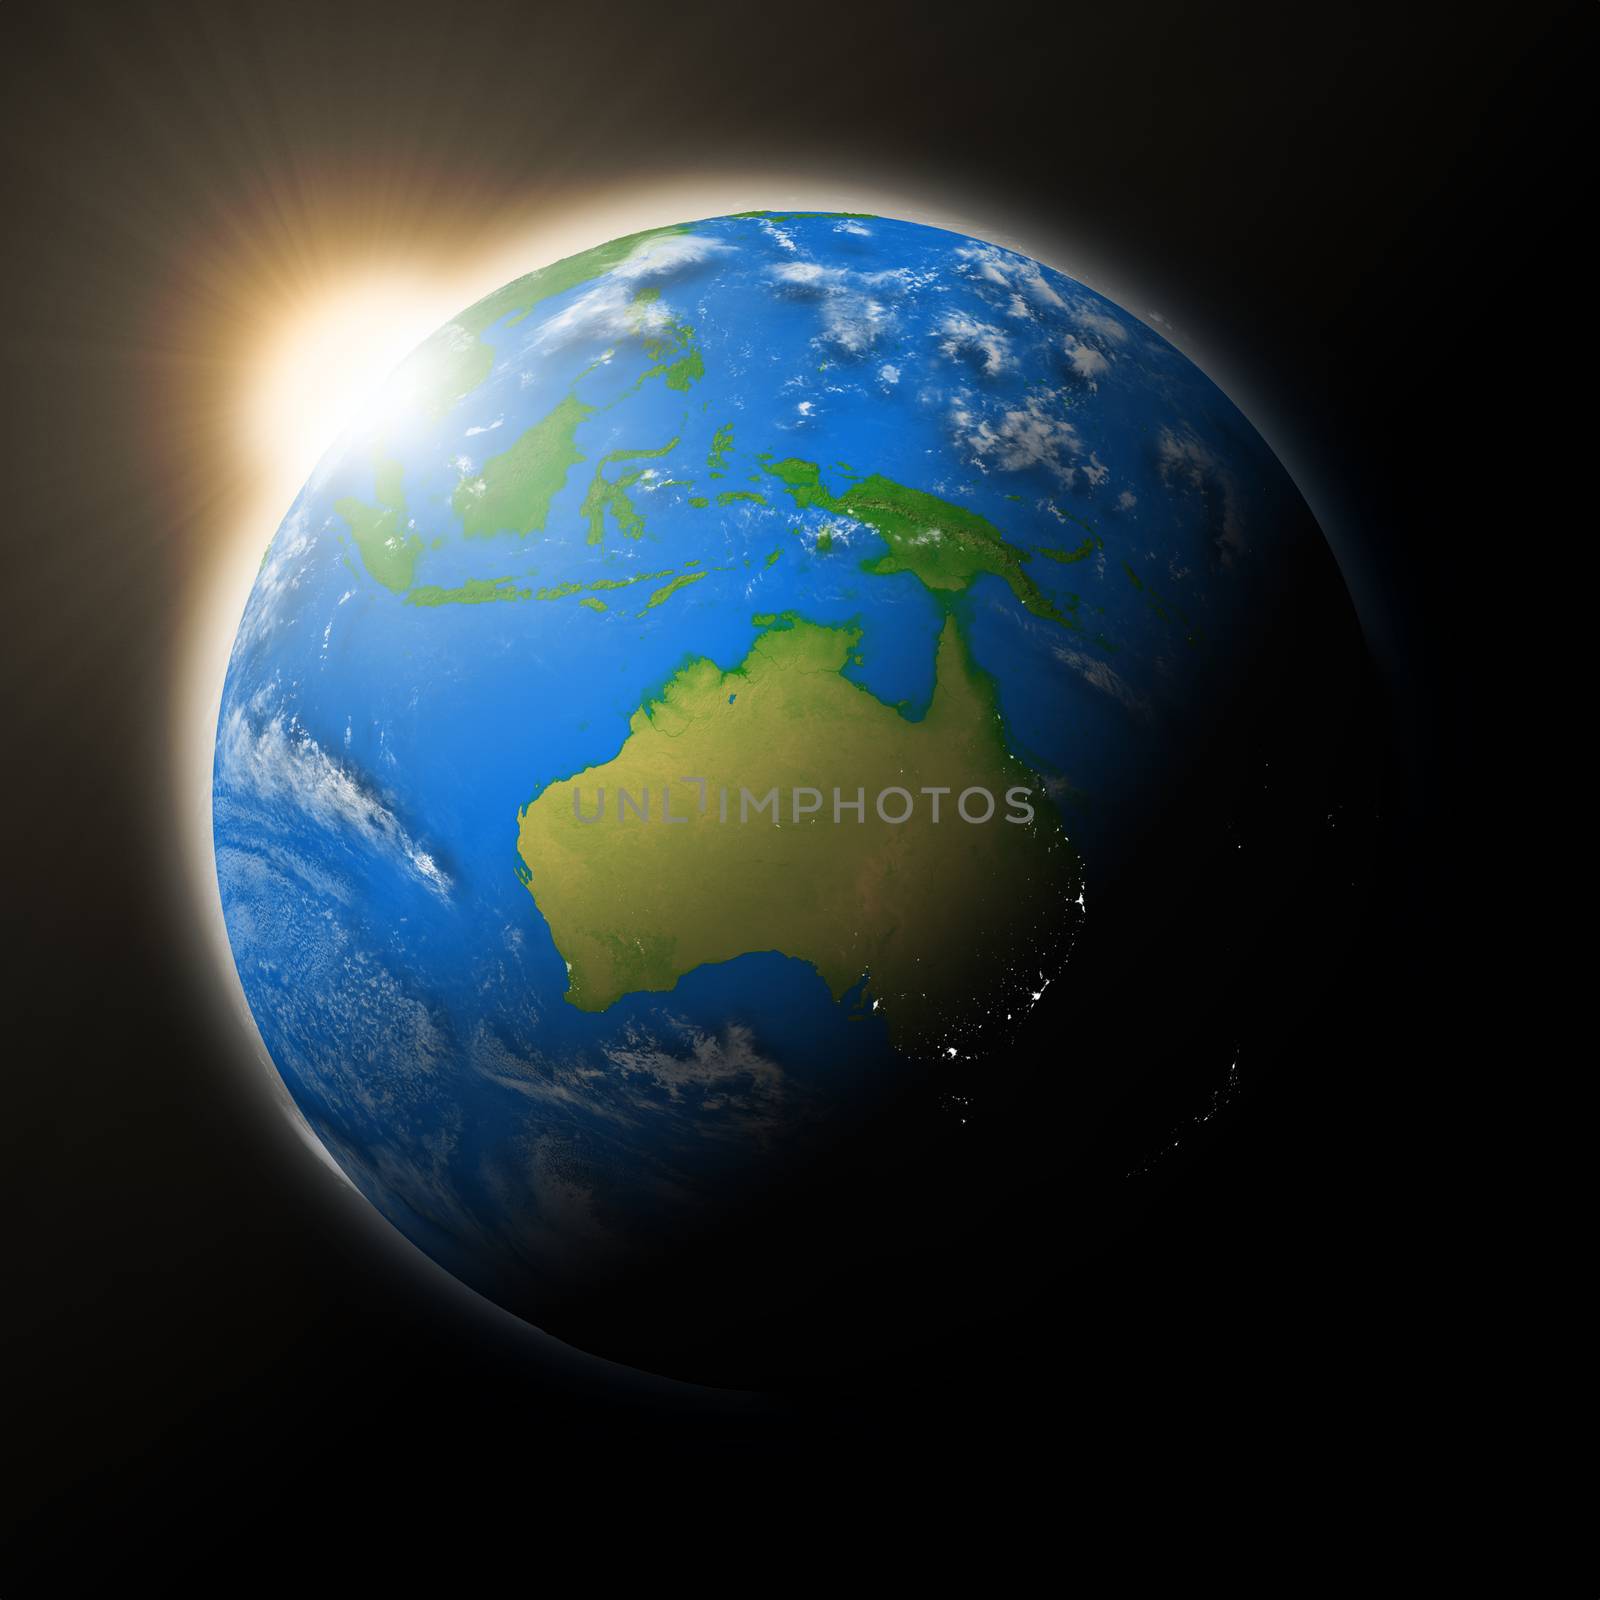 Sun over Australia on planet Earth by Harvepino